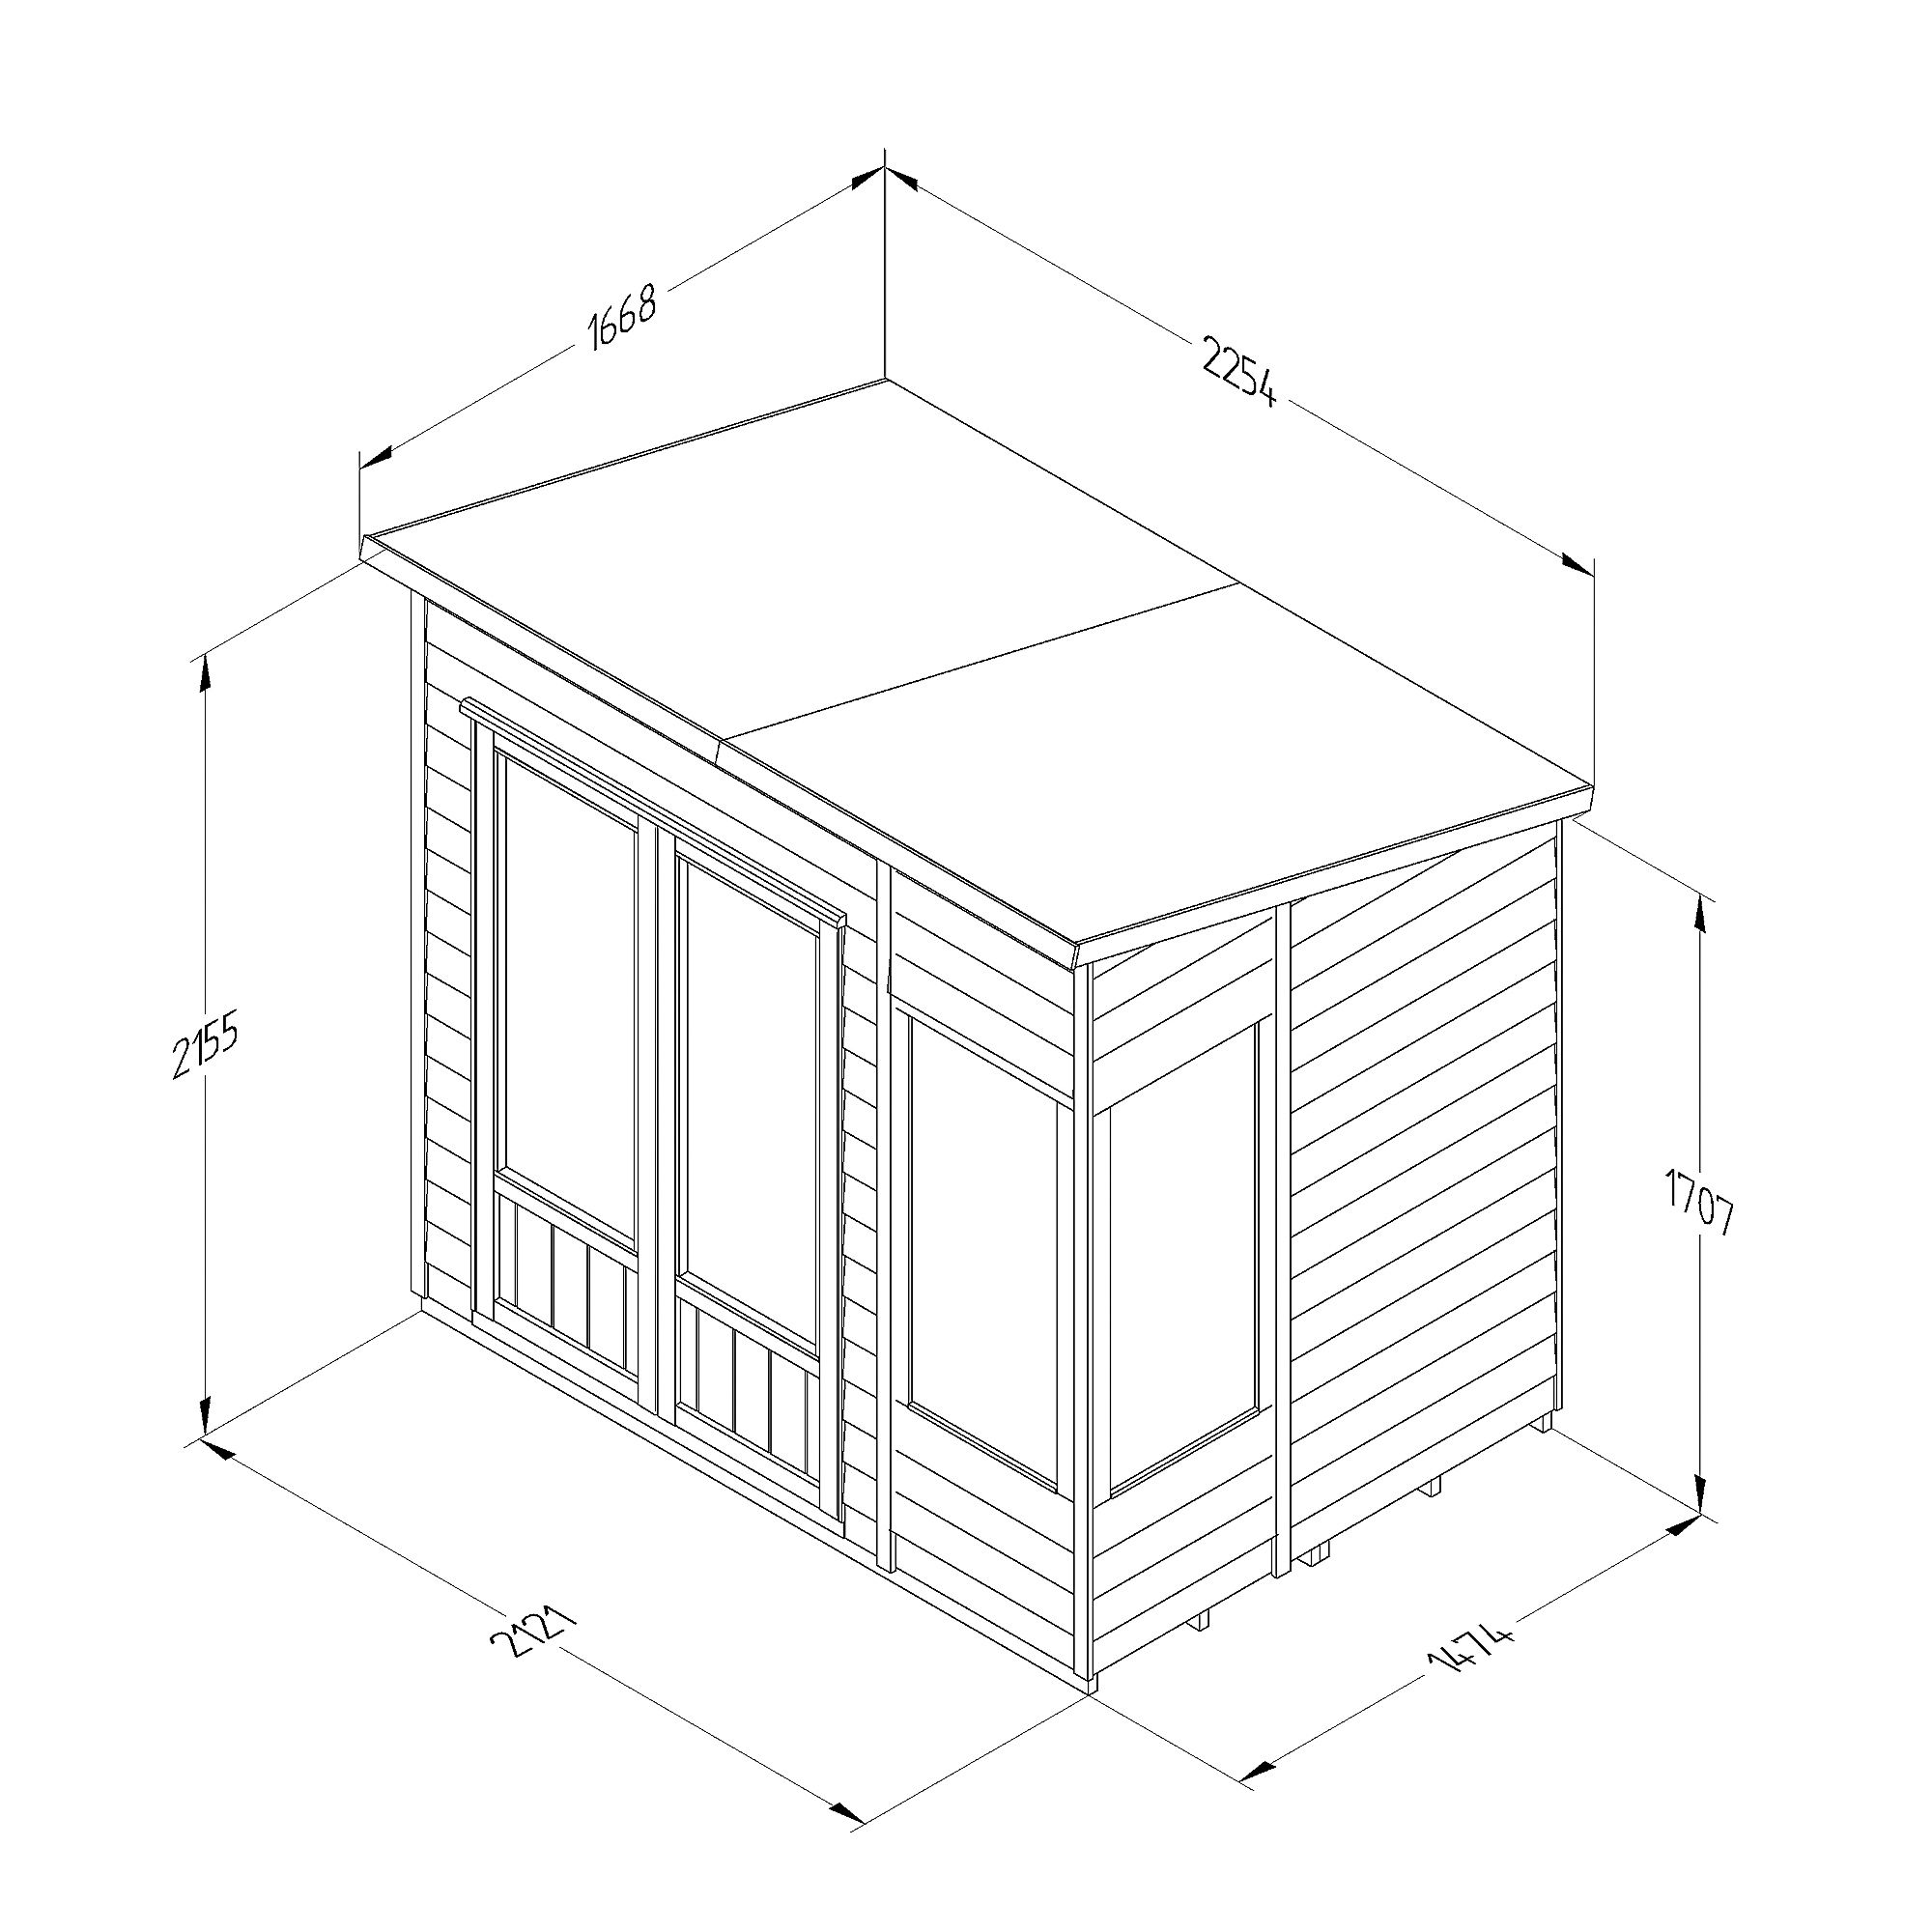 Forest Garden Oakley 7x5 ft with Double door & 3 windows Pent Solid wood Summer house (Base included)